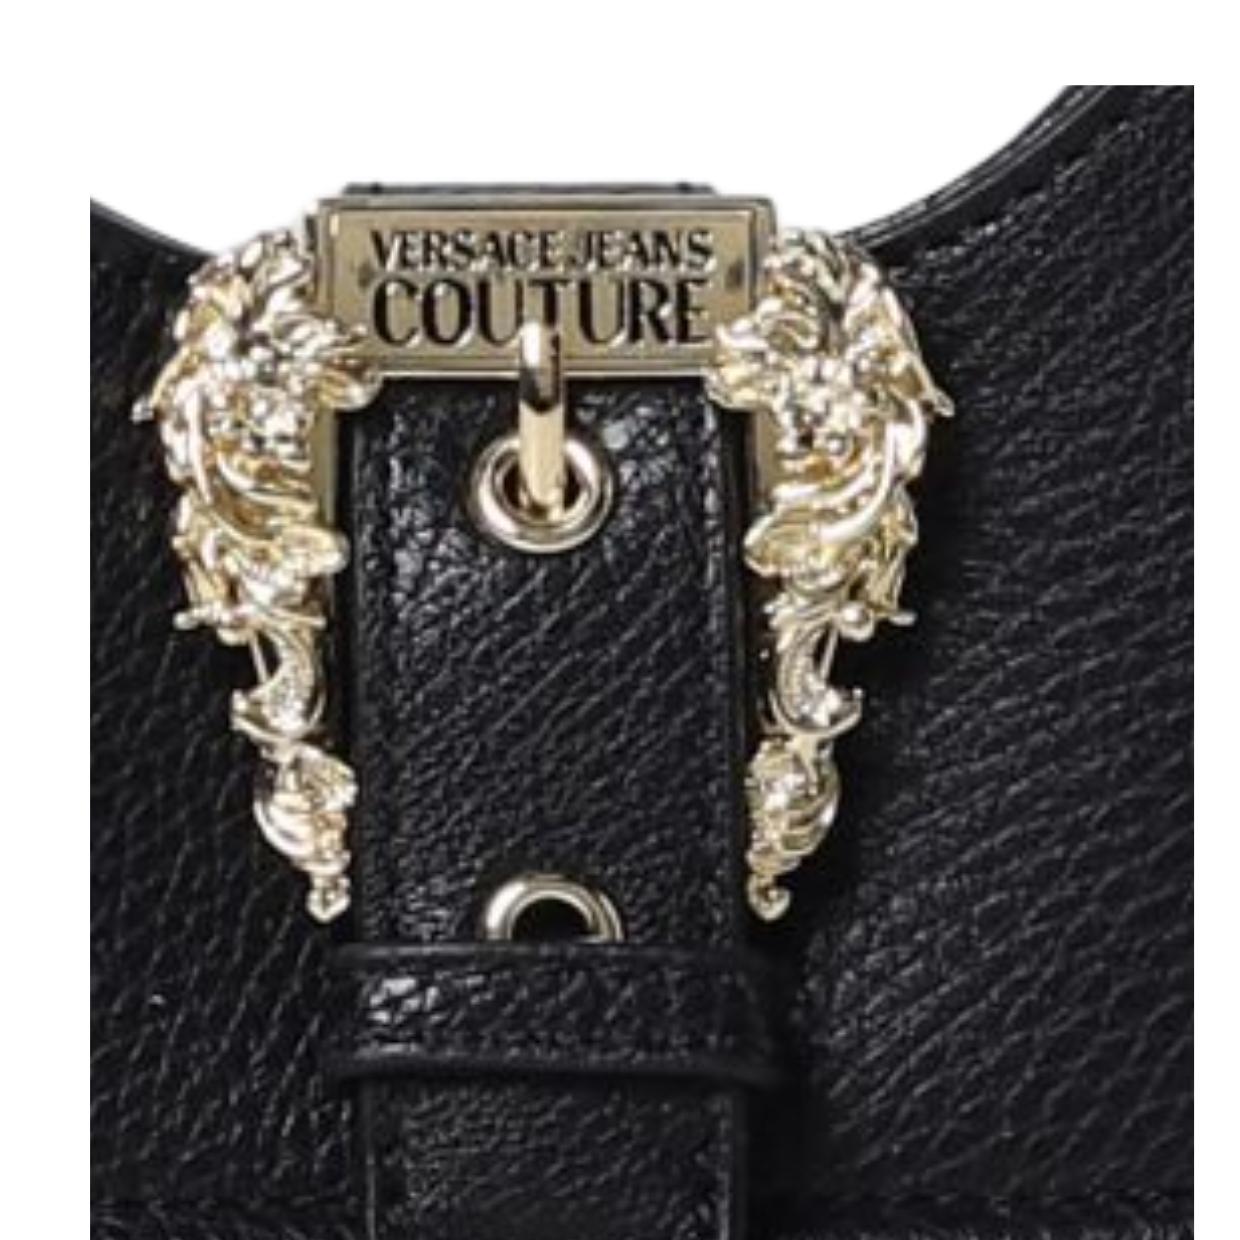 Versace Jeans Couture Buckle Mini Black Crossbody Bags